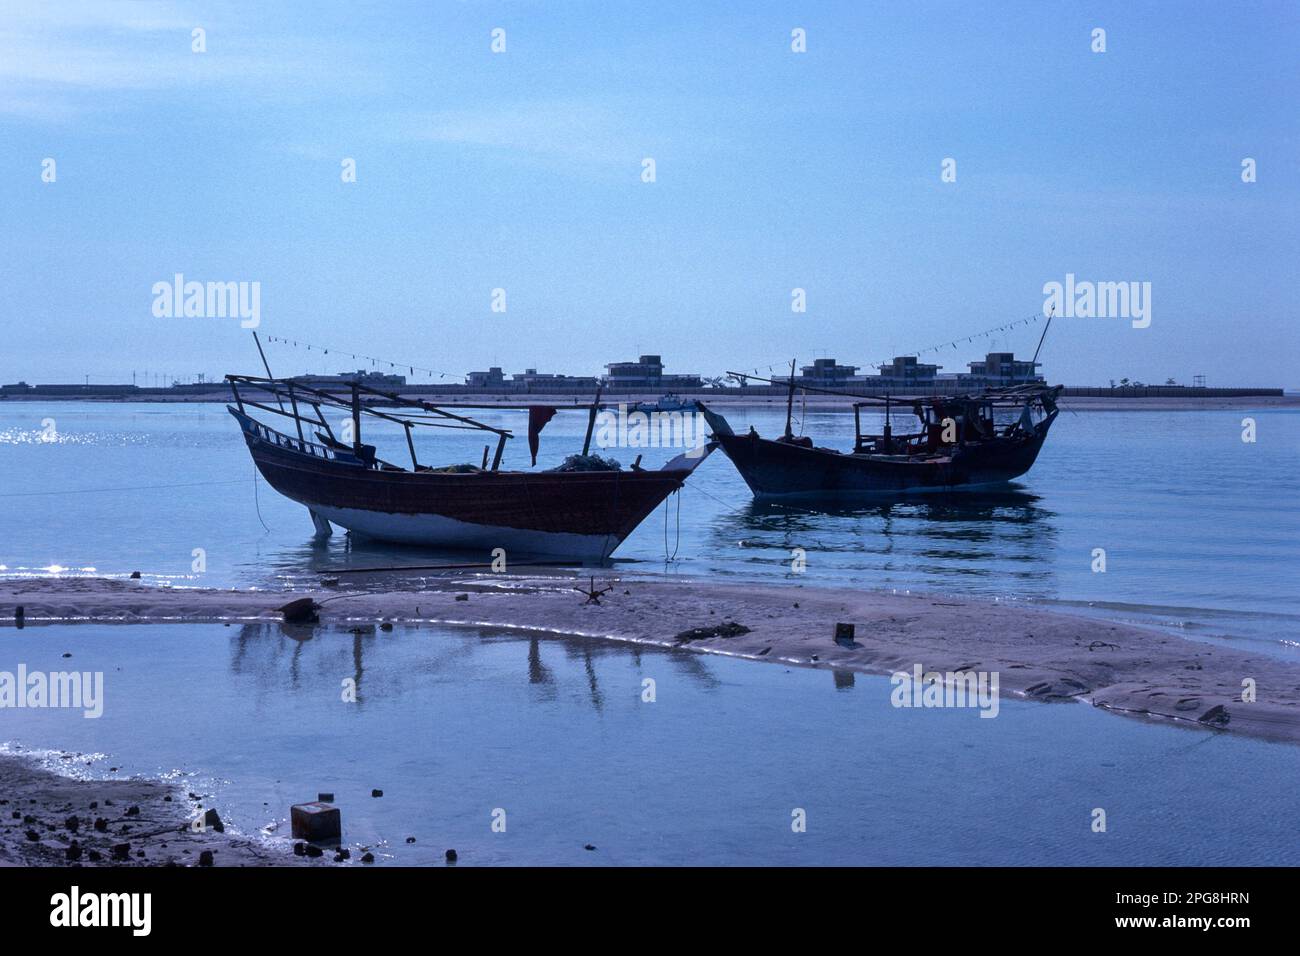 Abu Dhabi UAE 1976 – dhows moored at Al Bateen harbour (this area has now been redeveloped) in Abu Dhabi, United Arab Emirates Stock Photo